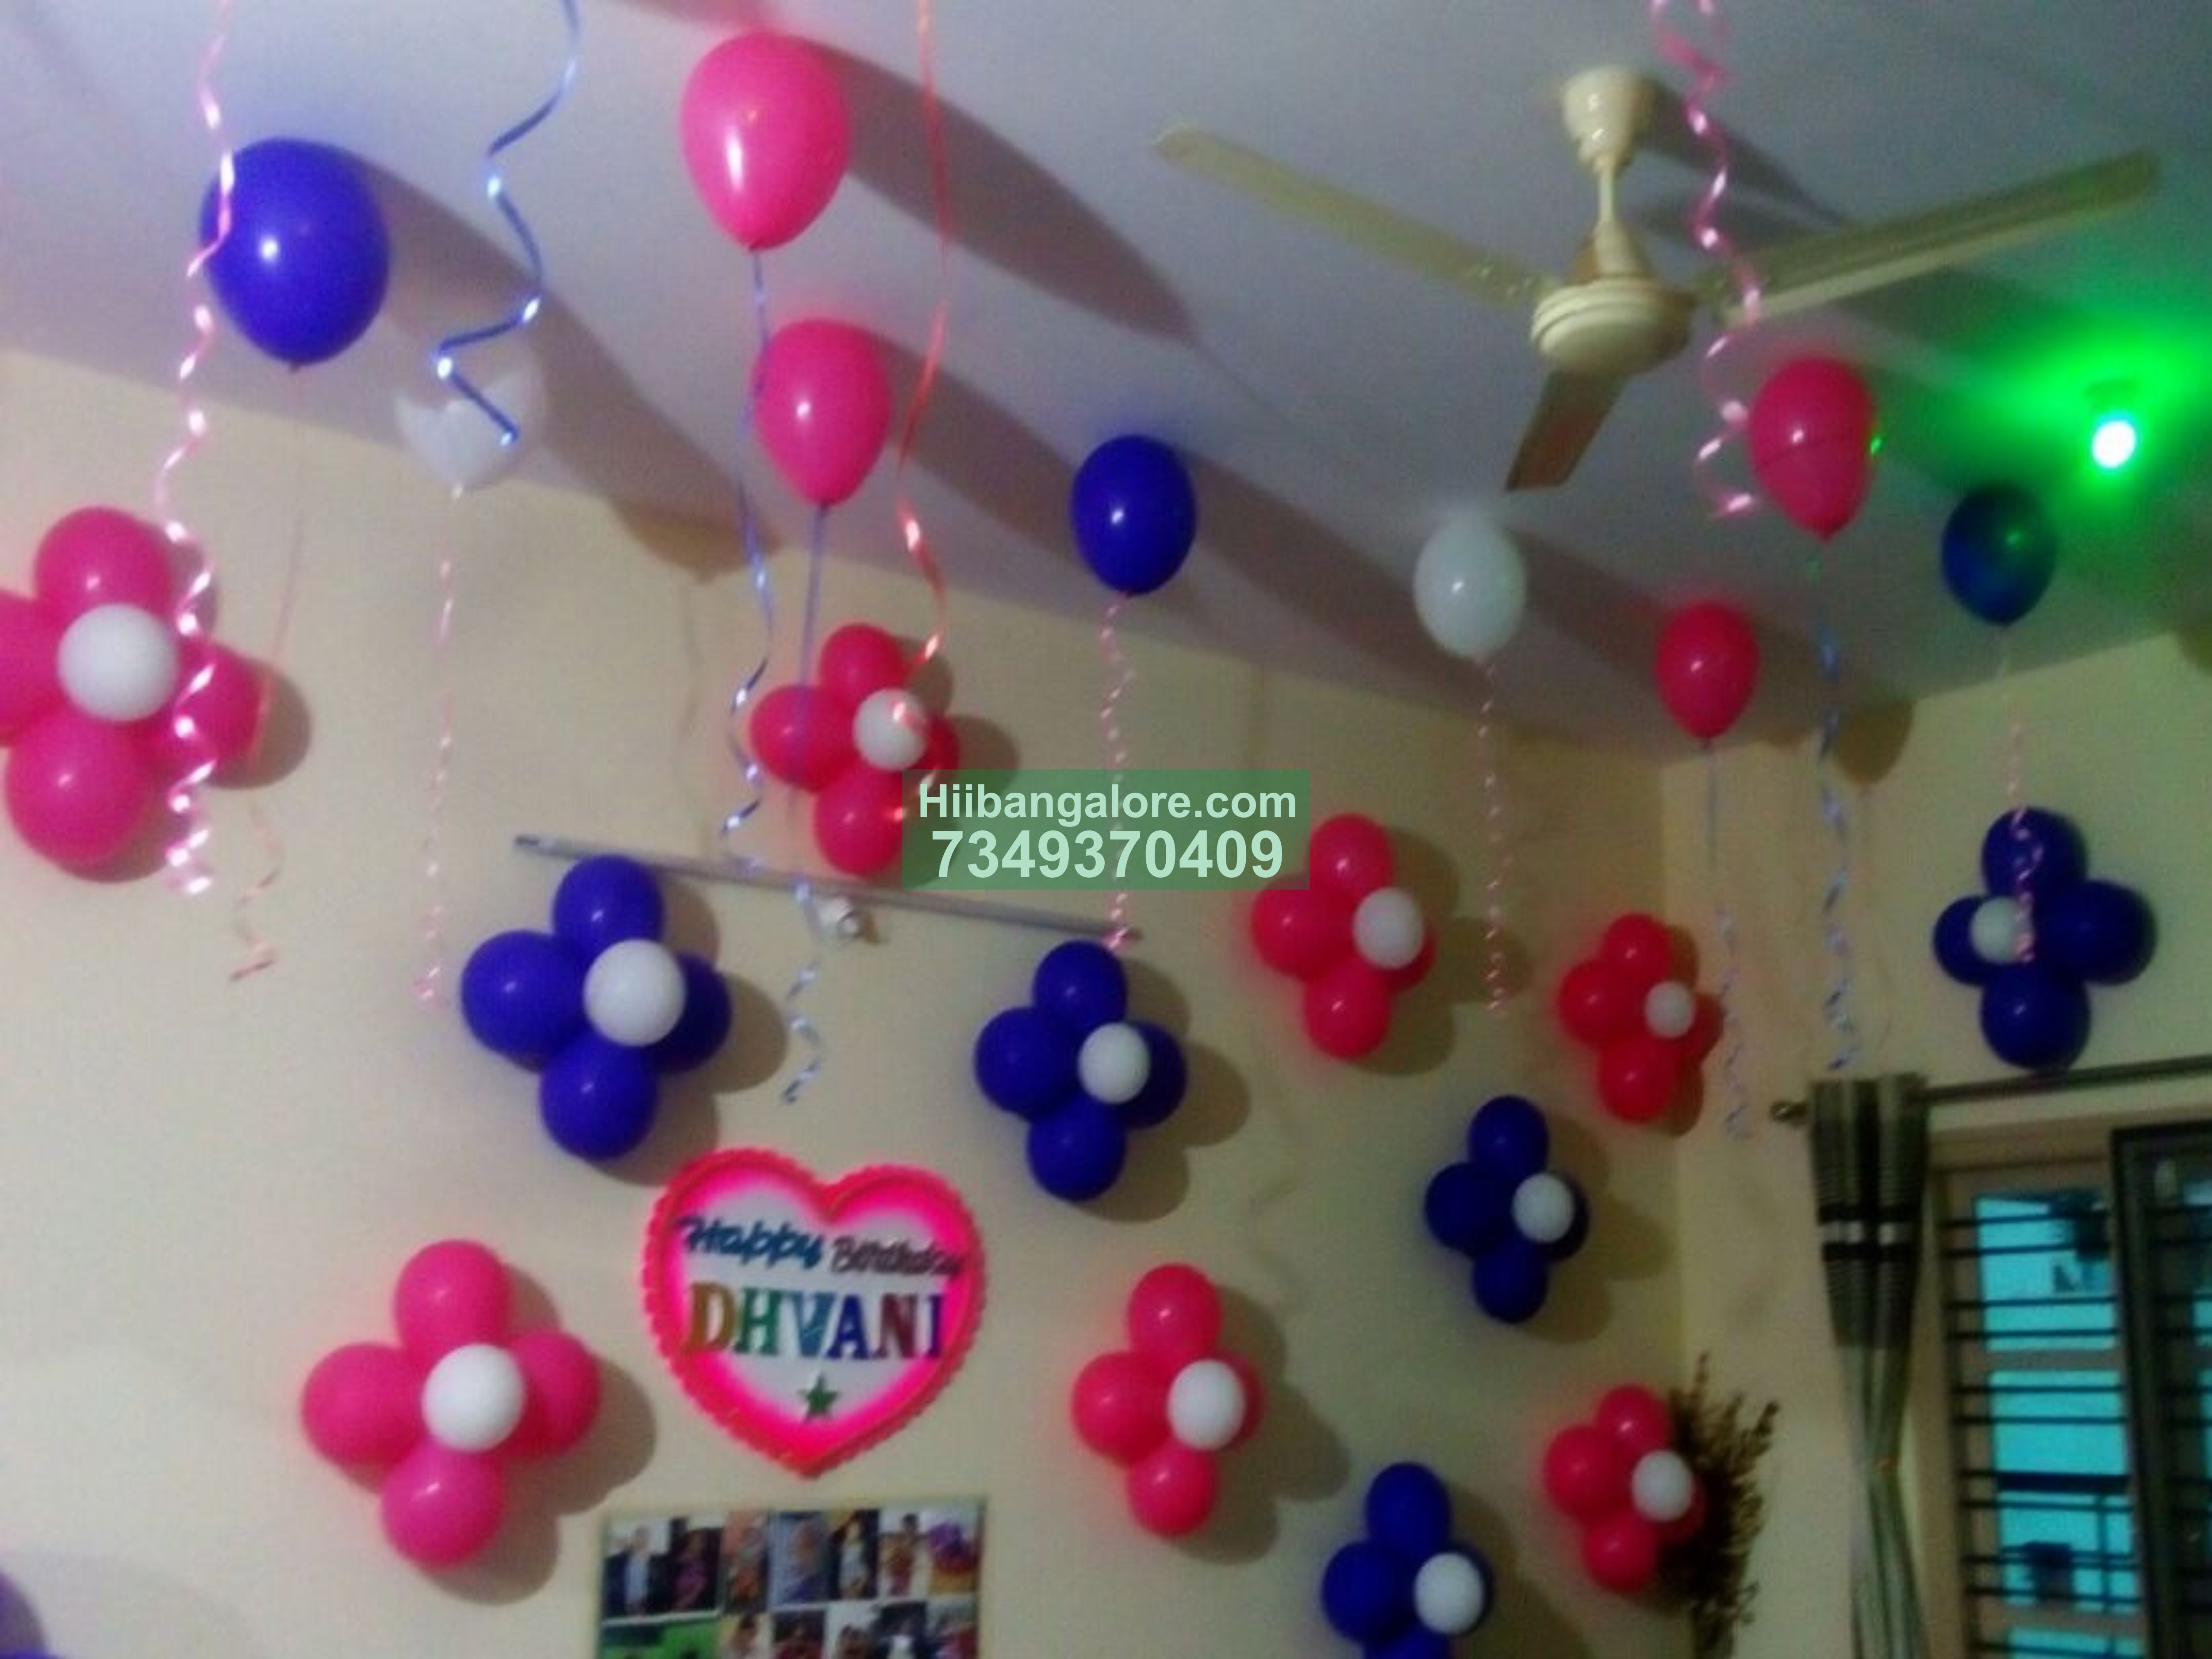 simple birthday party balloon decor with name board Bangalore